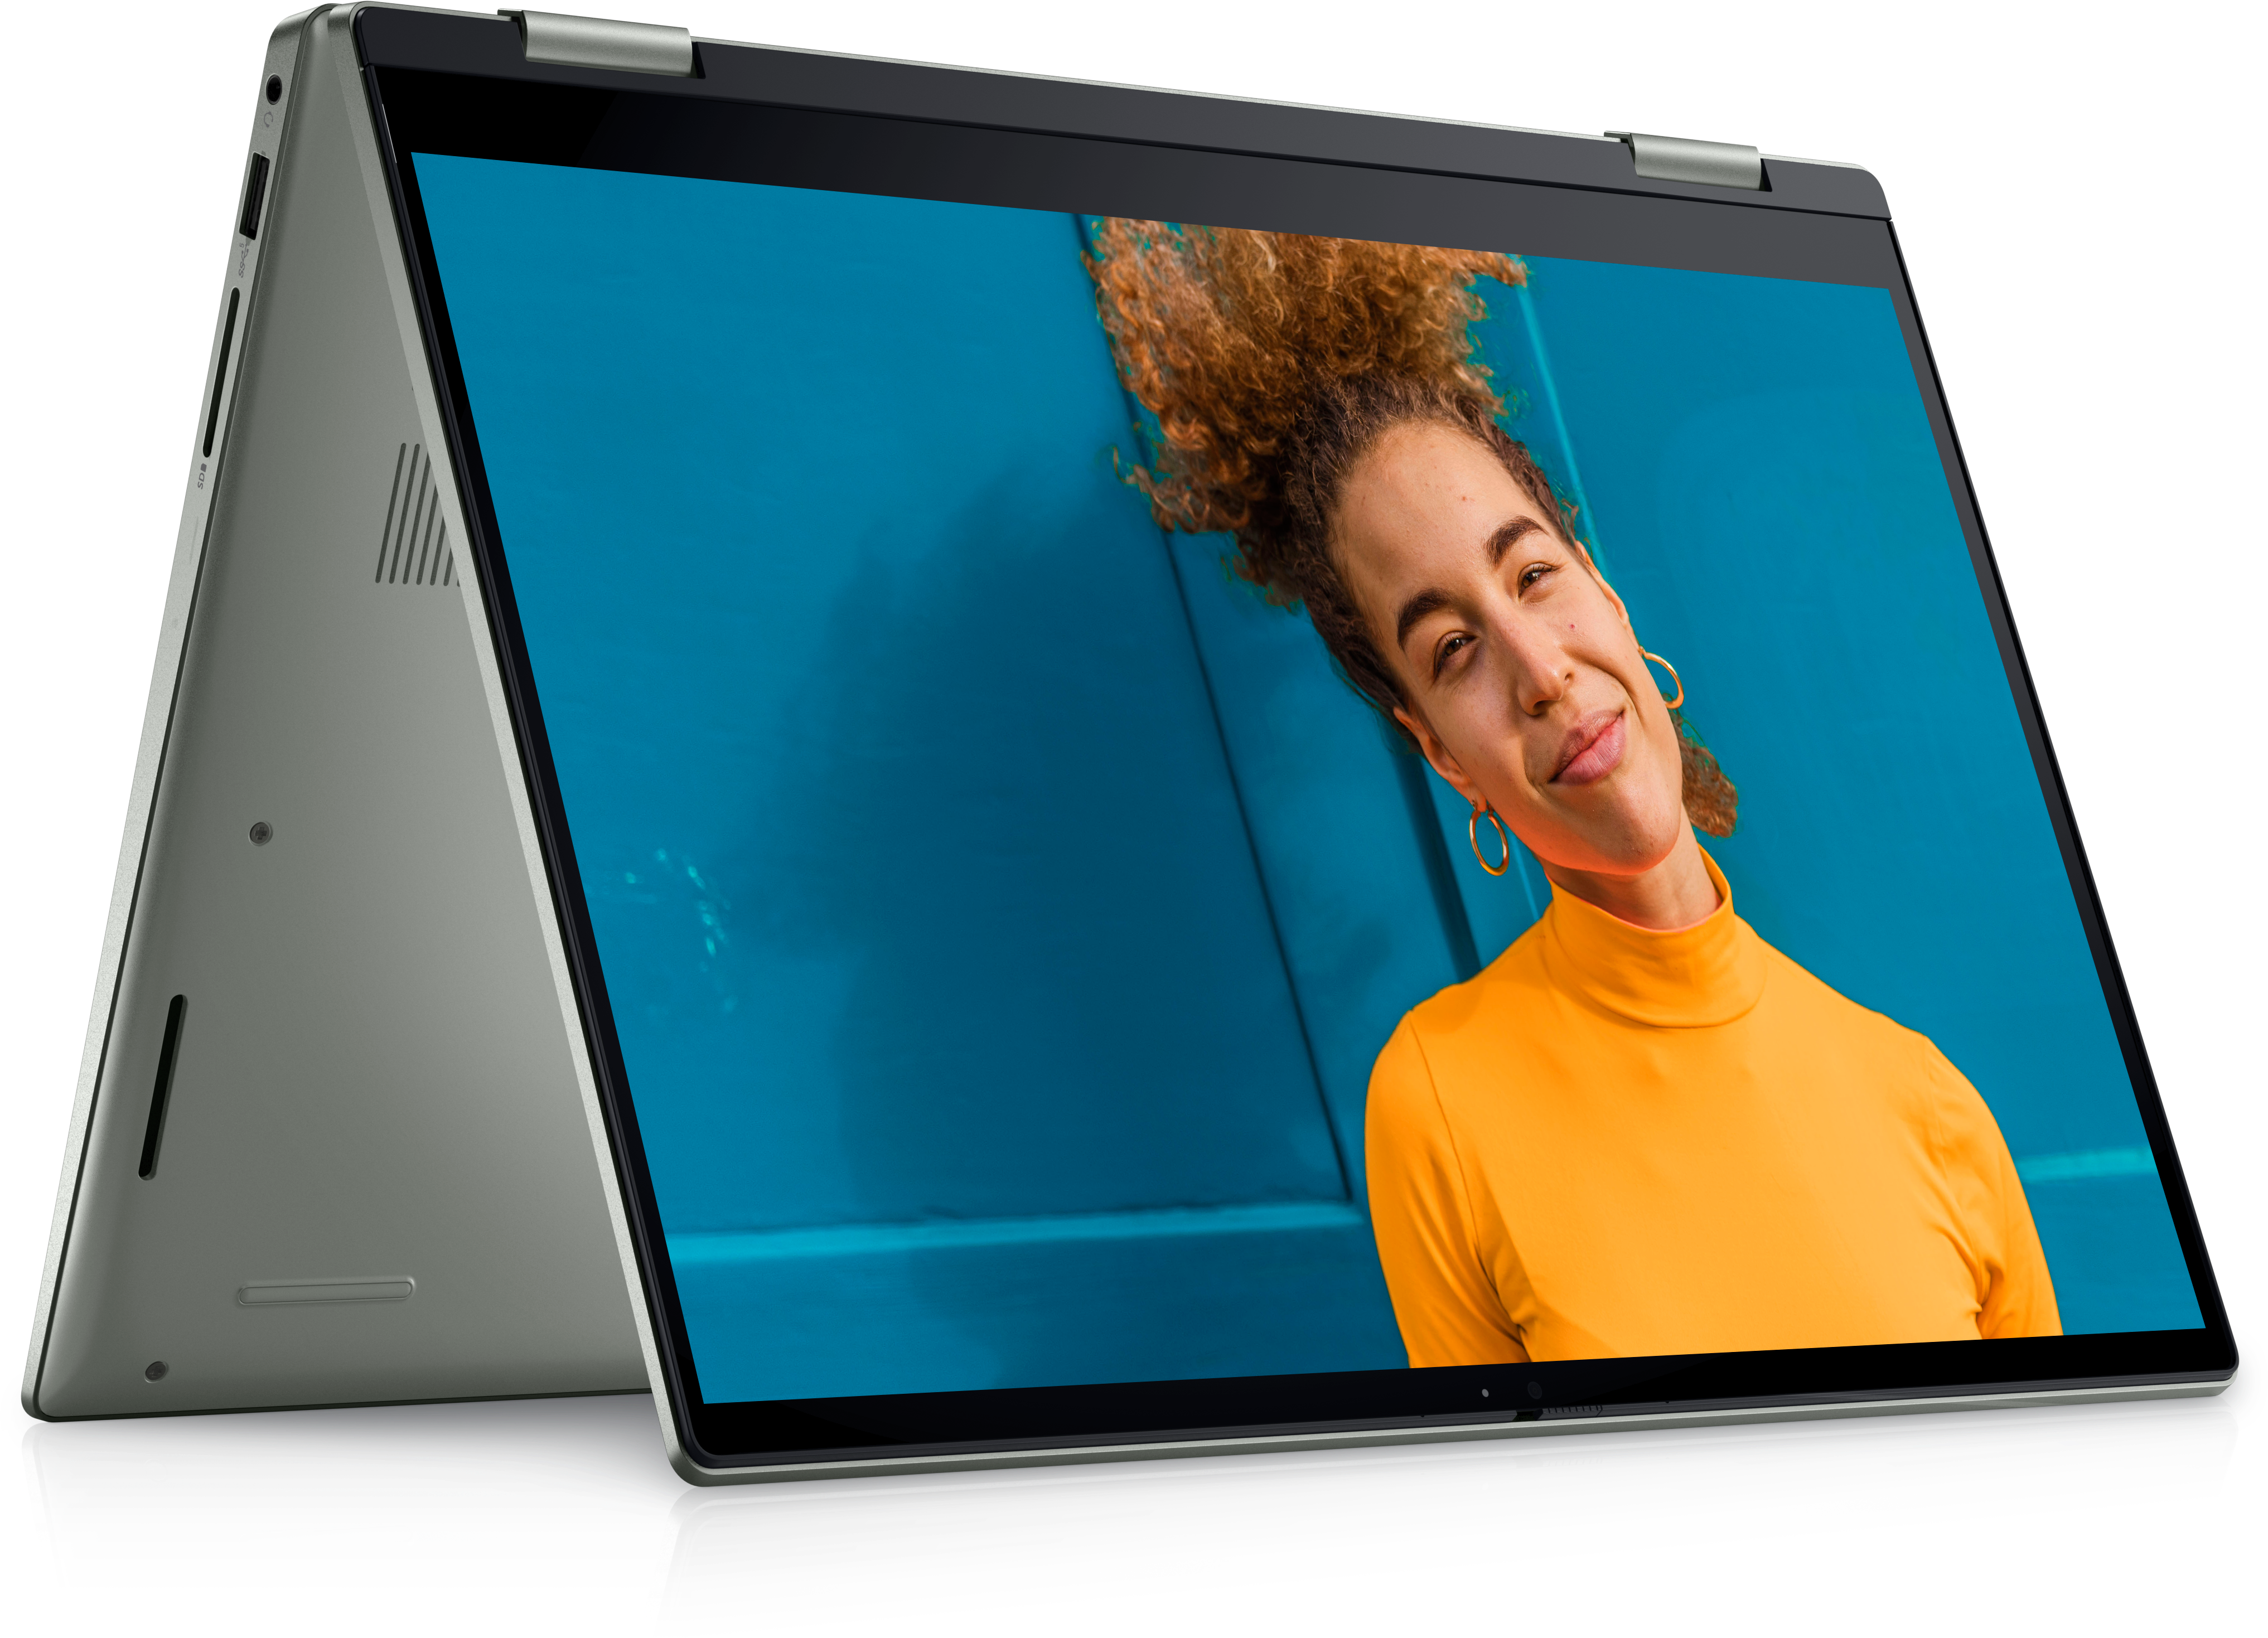 Inspiron 14 2-in-1